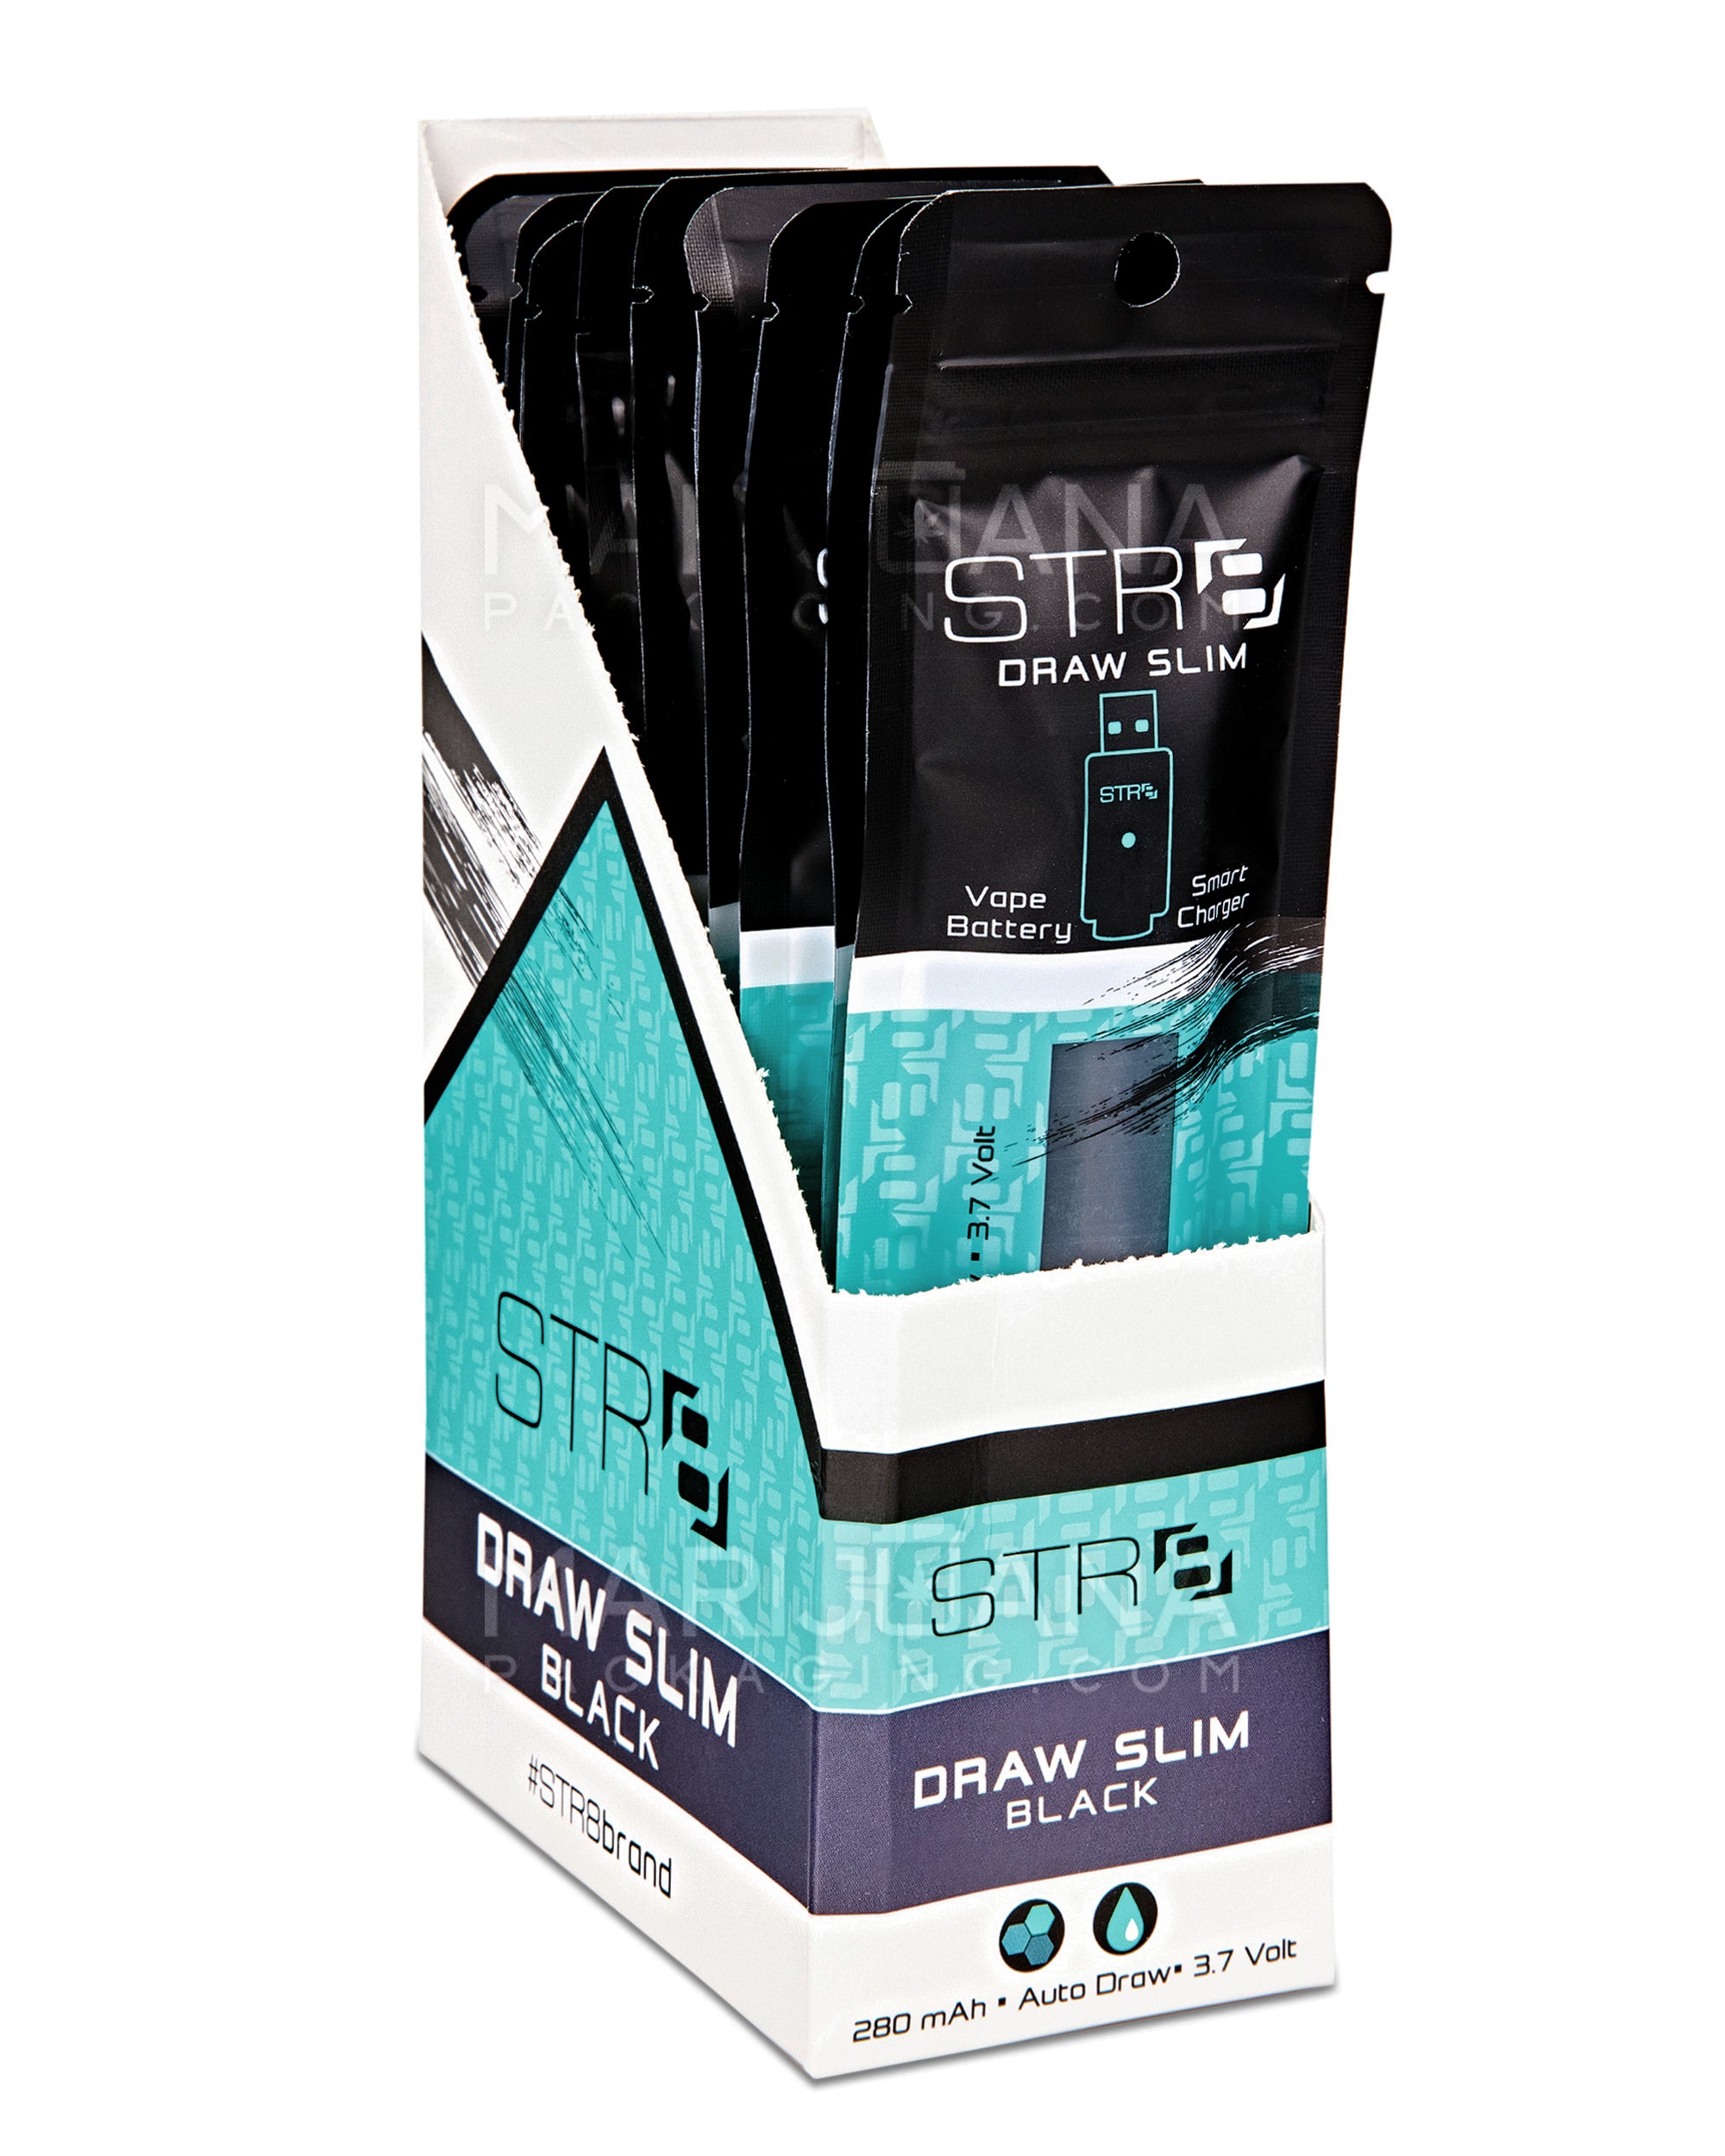 STR8 | Auto Draw Slim Vape Batteries with Charger | 280mAh - Black - 10 Count - 1